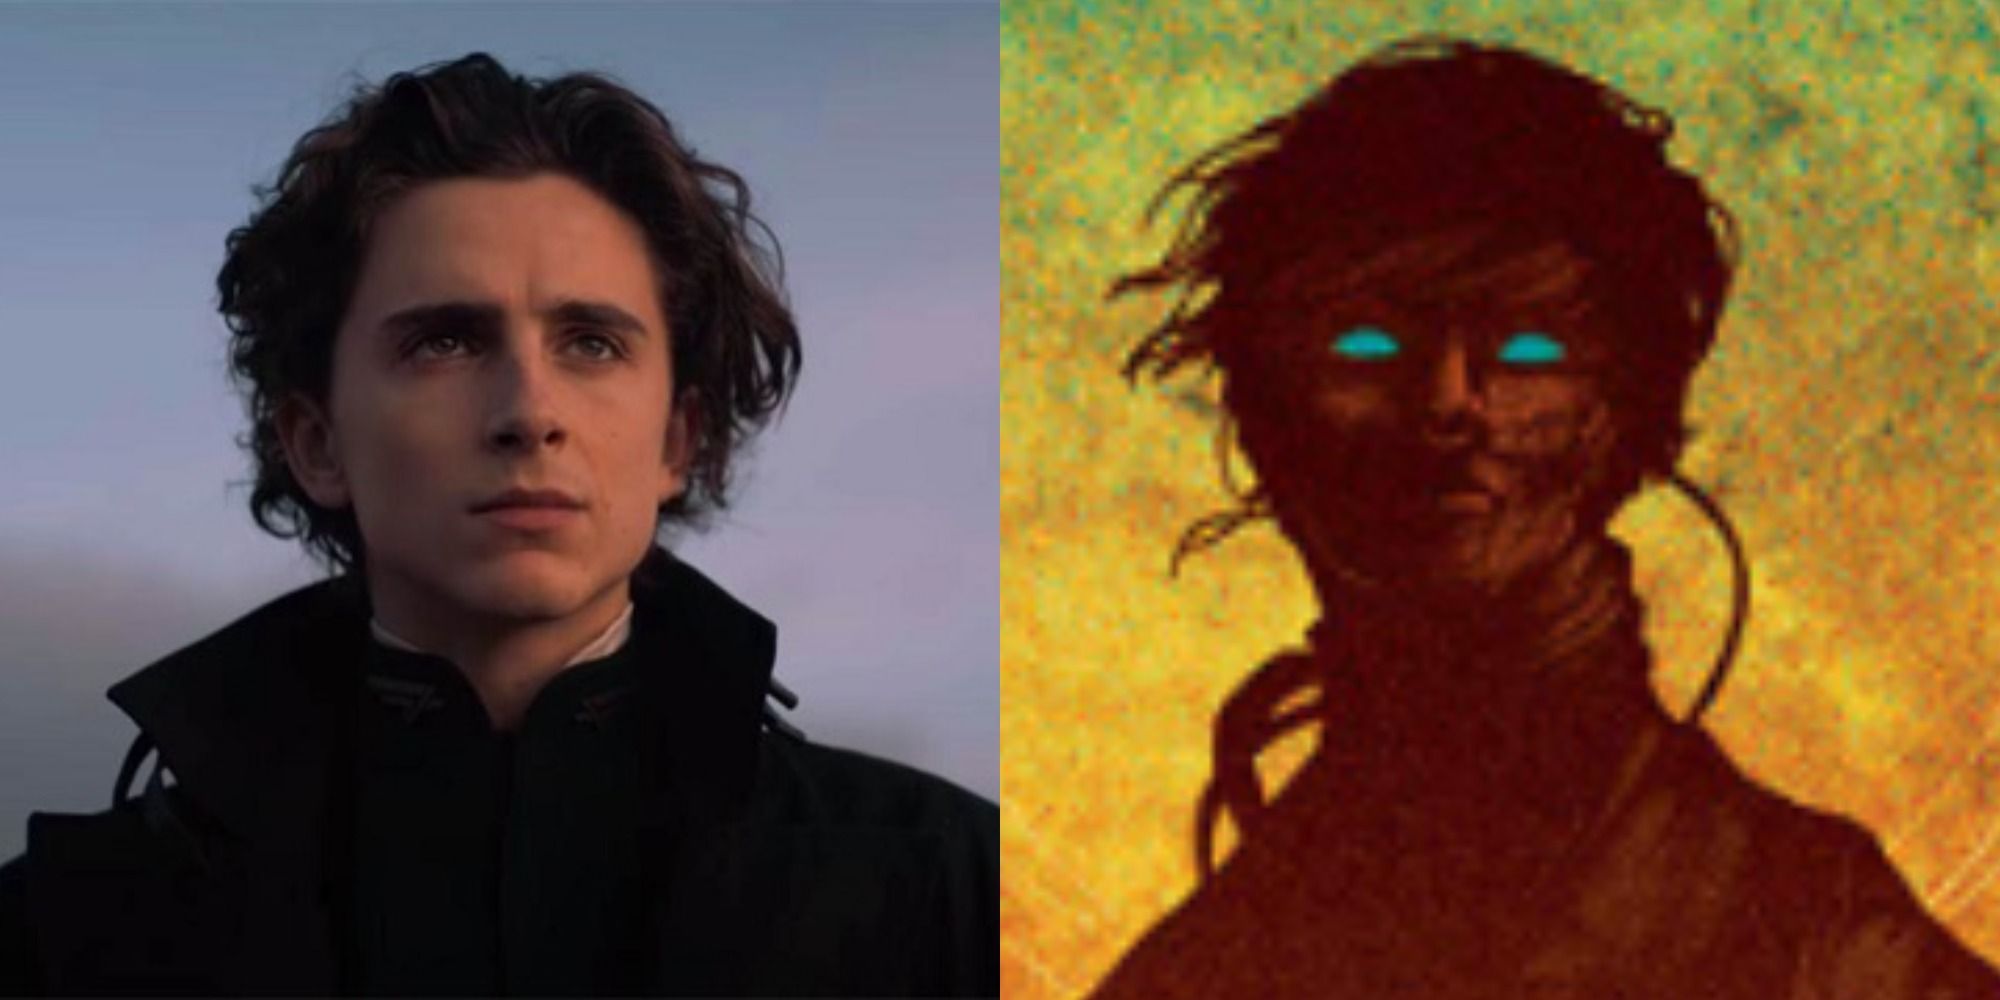 Timothee Chalamet as Paul Atreides staring at the horizon in Dune (2021) beside an image of Paul Atreides on the cover of Frank Herbert's Dune book